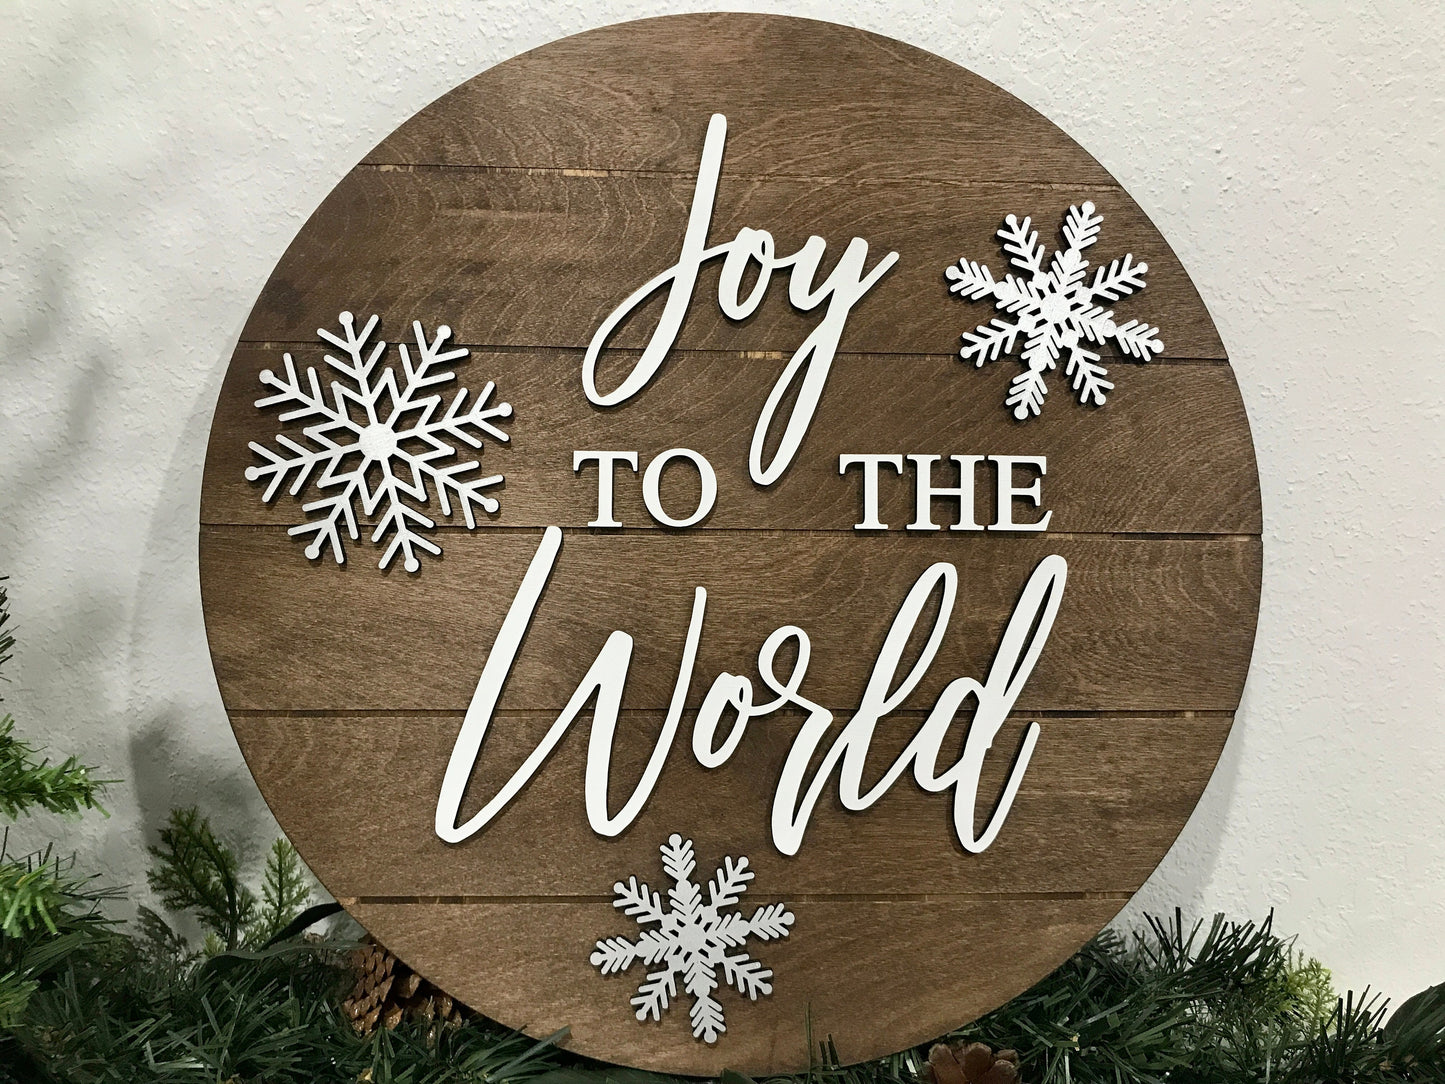 Joy to the world sign, Christmas decorations, 3D holiday decor shiplap wood signs, living room wooden sign wall hanging, silver mantel decor